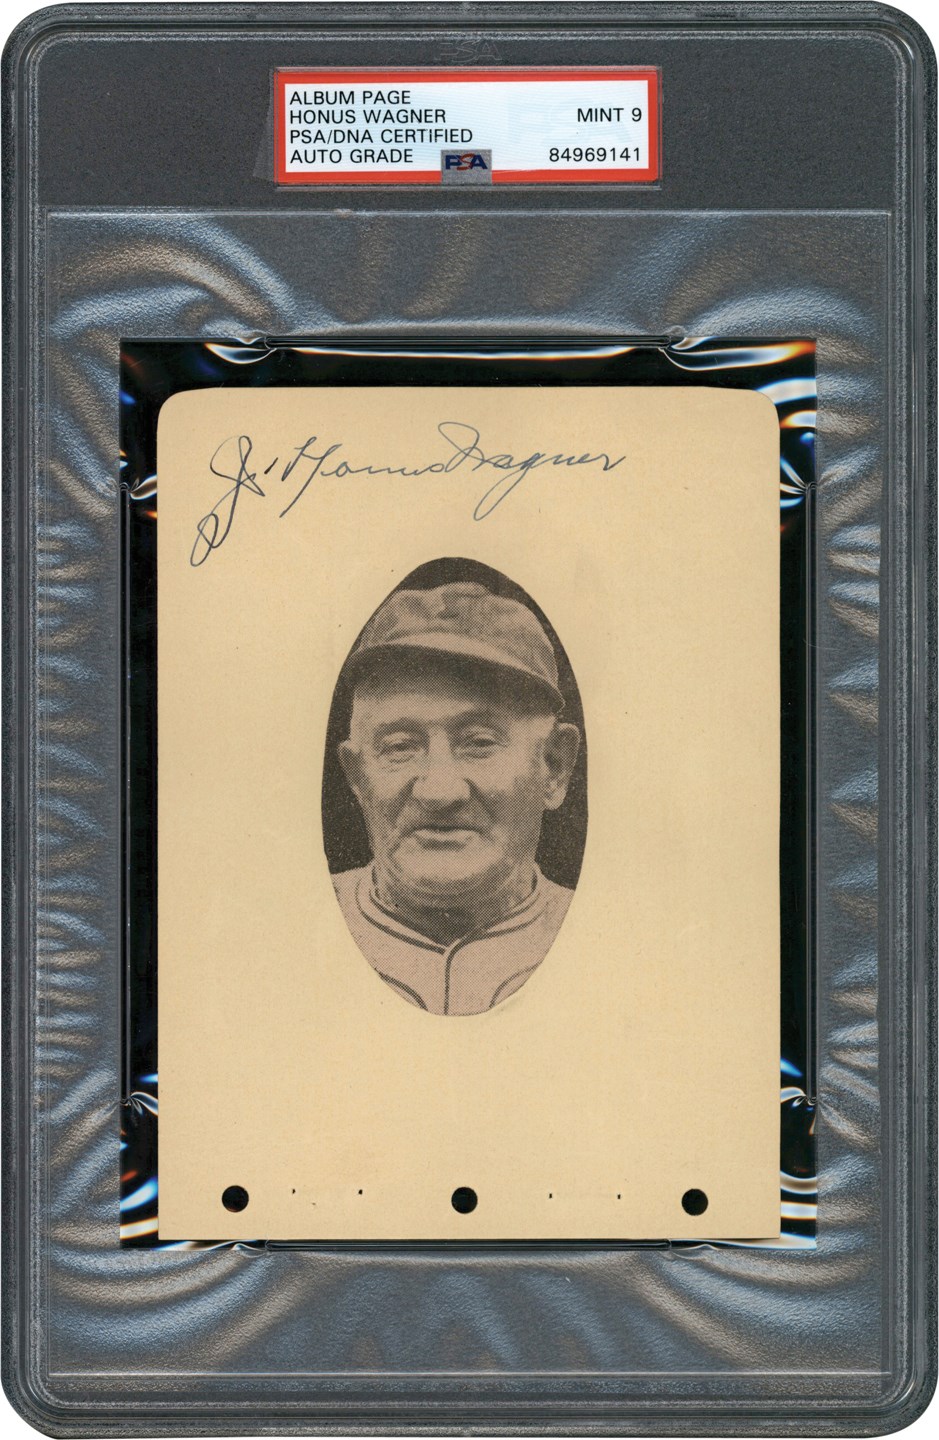 - Honus Wagner Signed Album Page with Photo (PSA MINT 9)